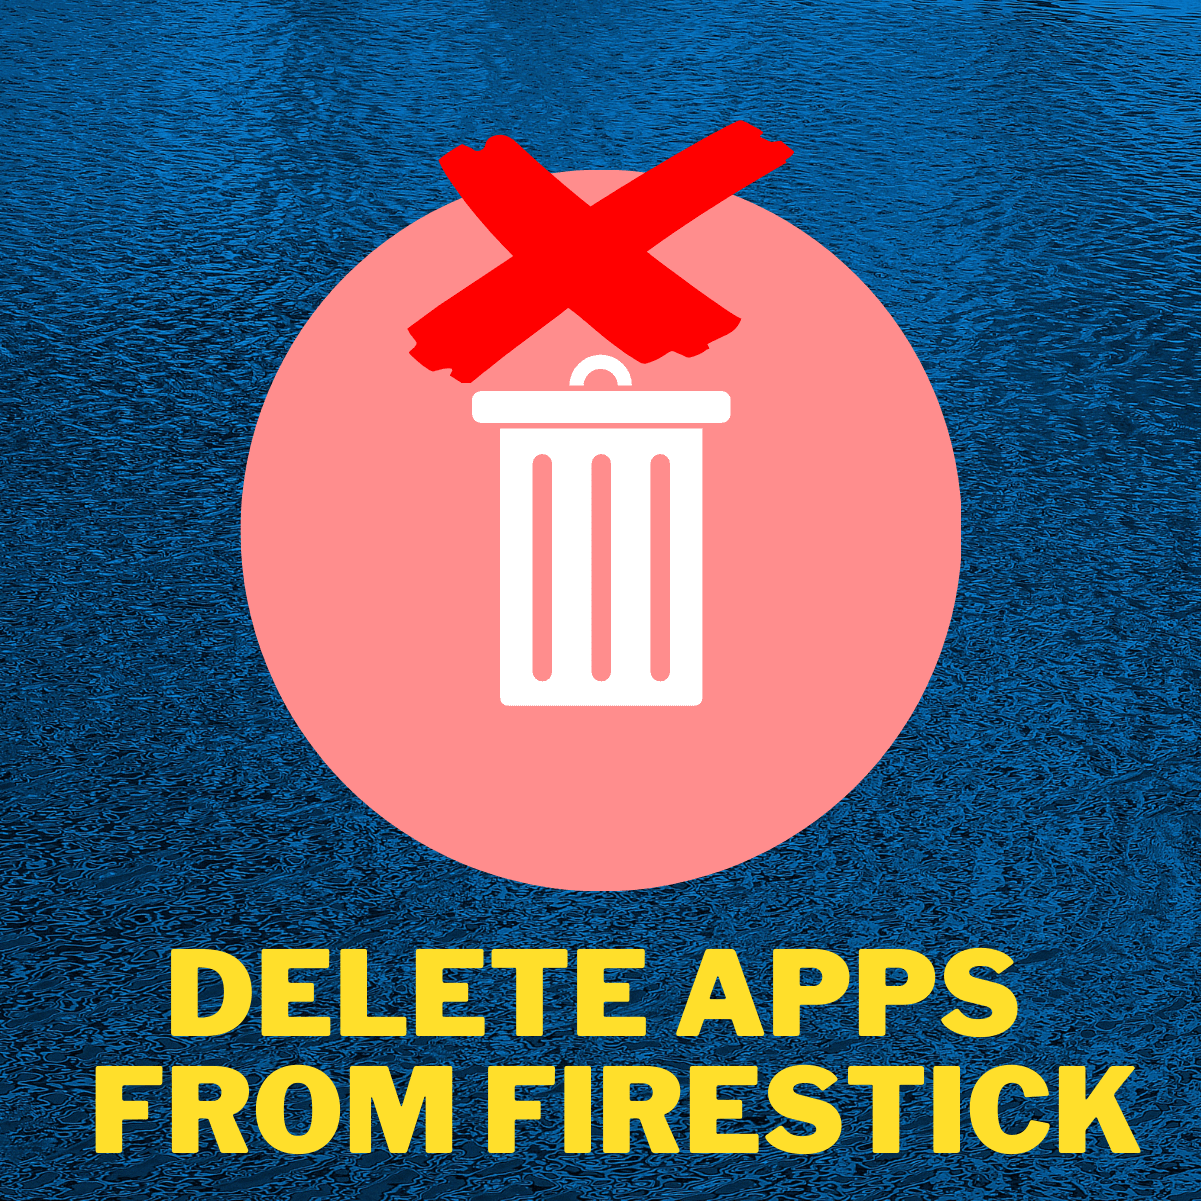 how to delete apps from amazon fire stick